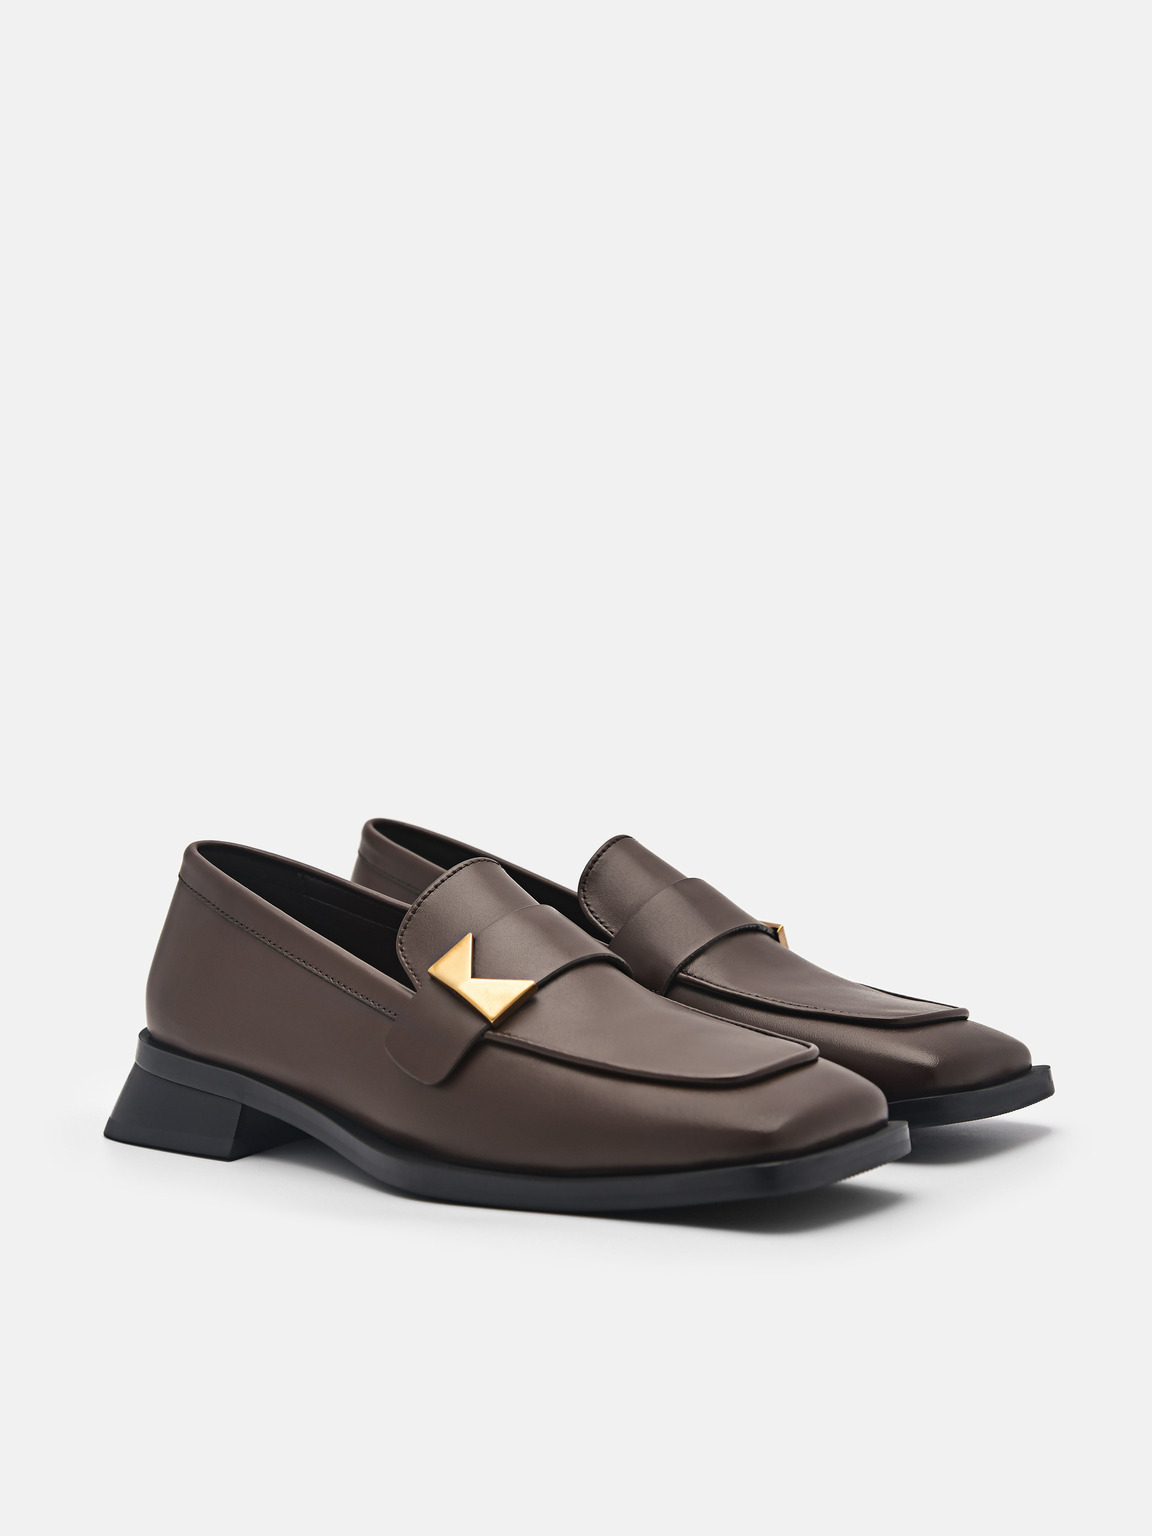 Marion Leather Loafers, Dark Brown